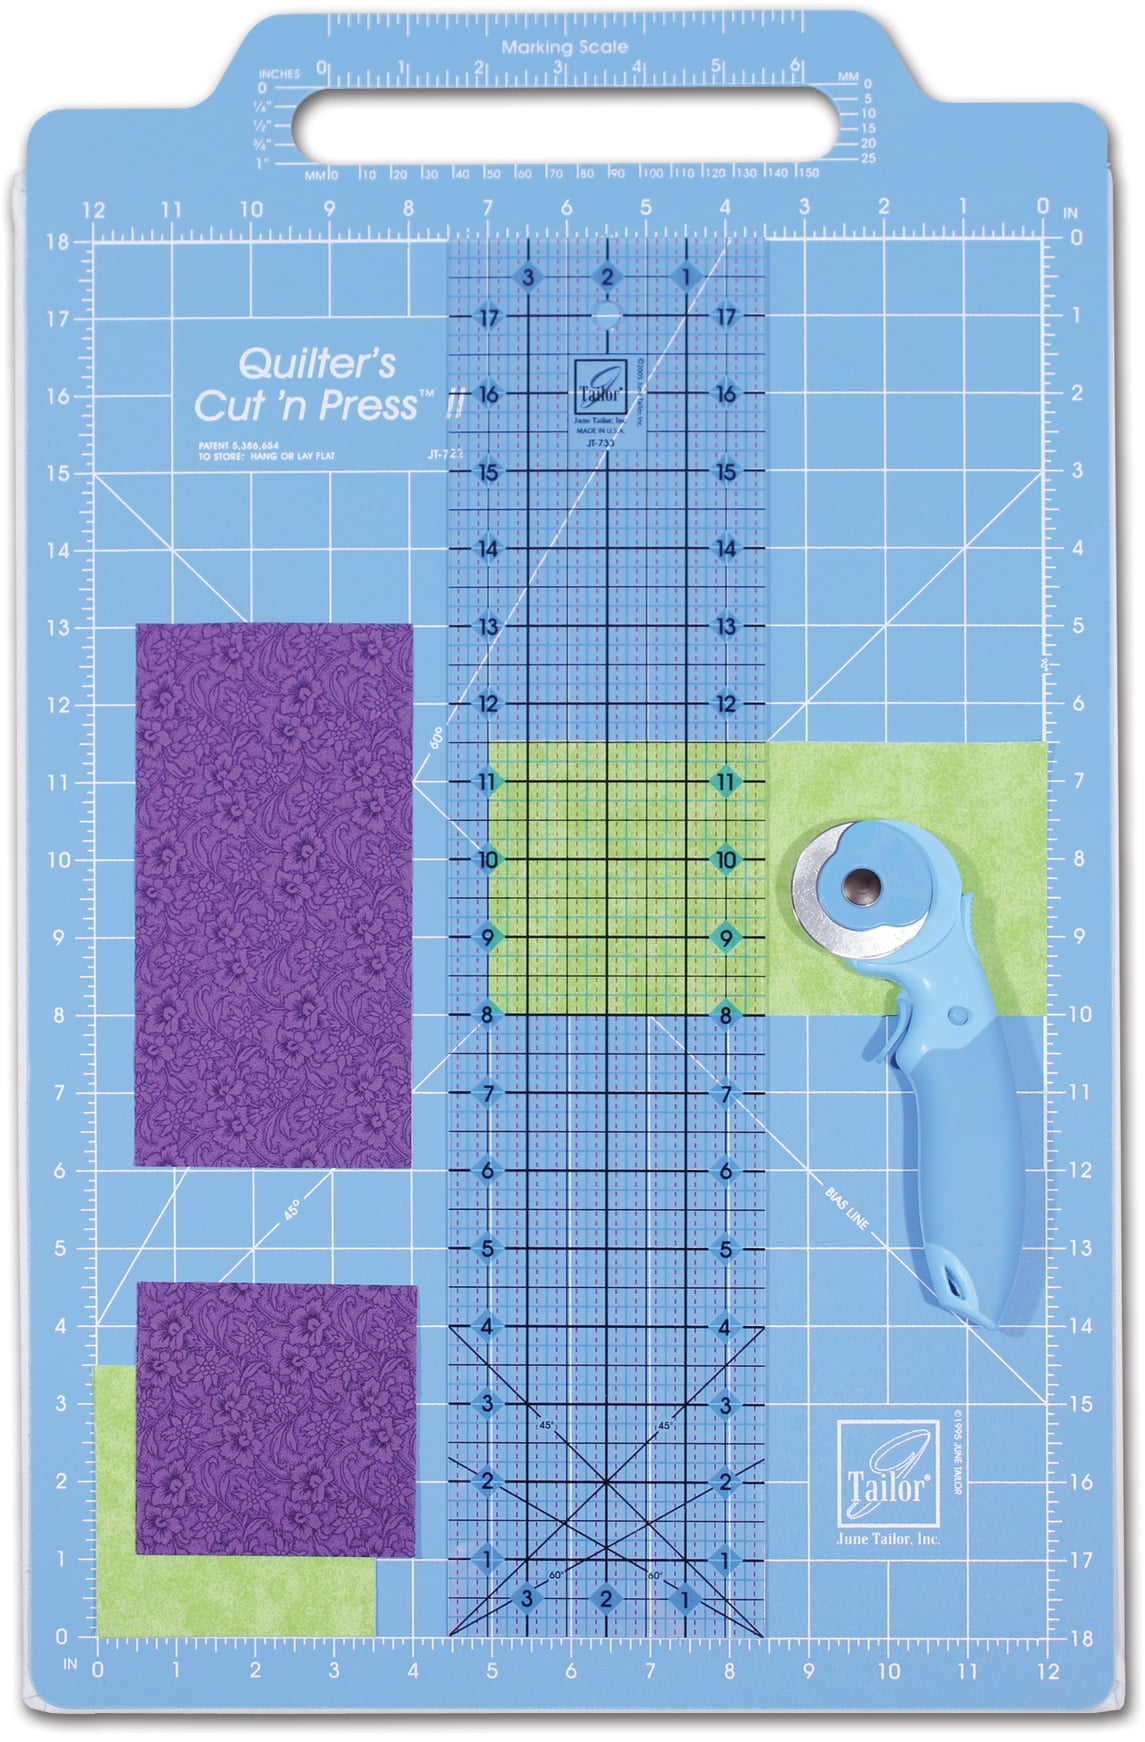 June Tailor Quilters Cut-n-Press by June Tailor